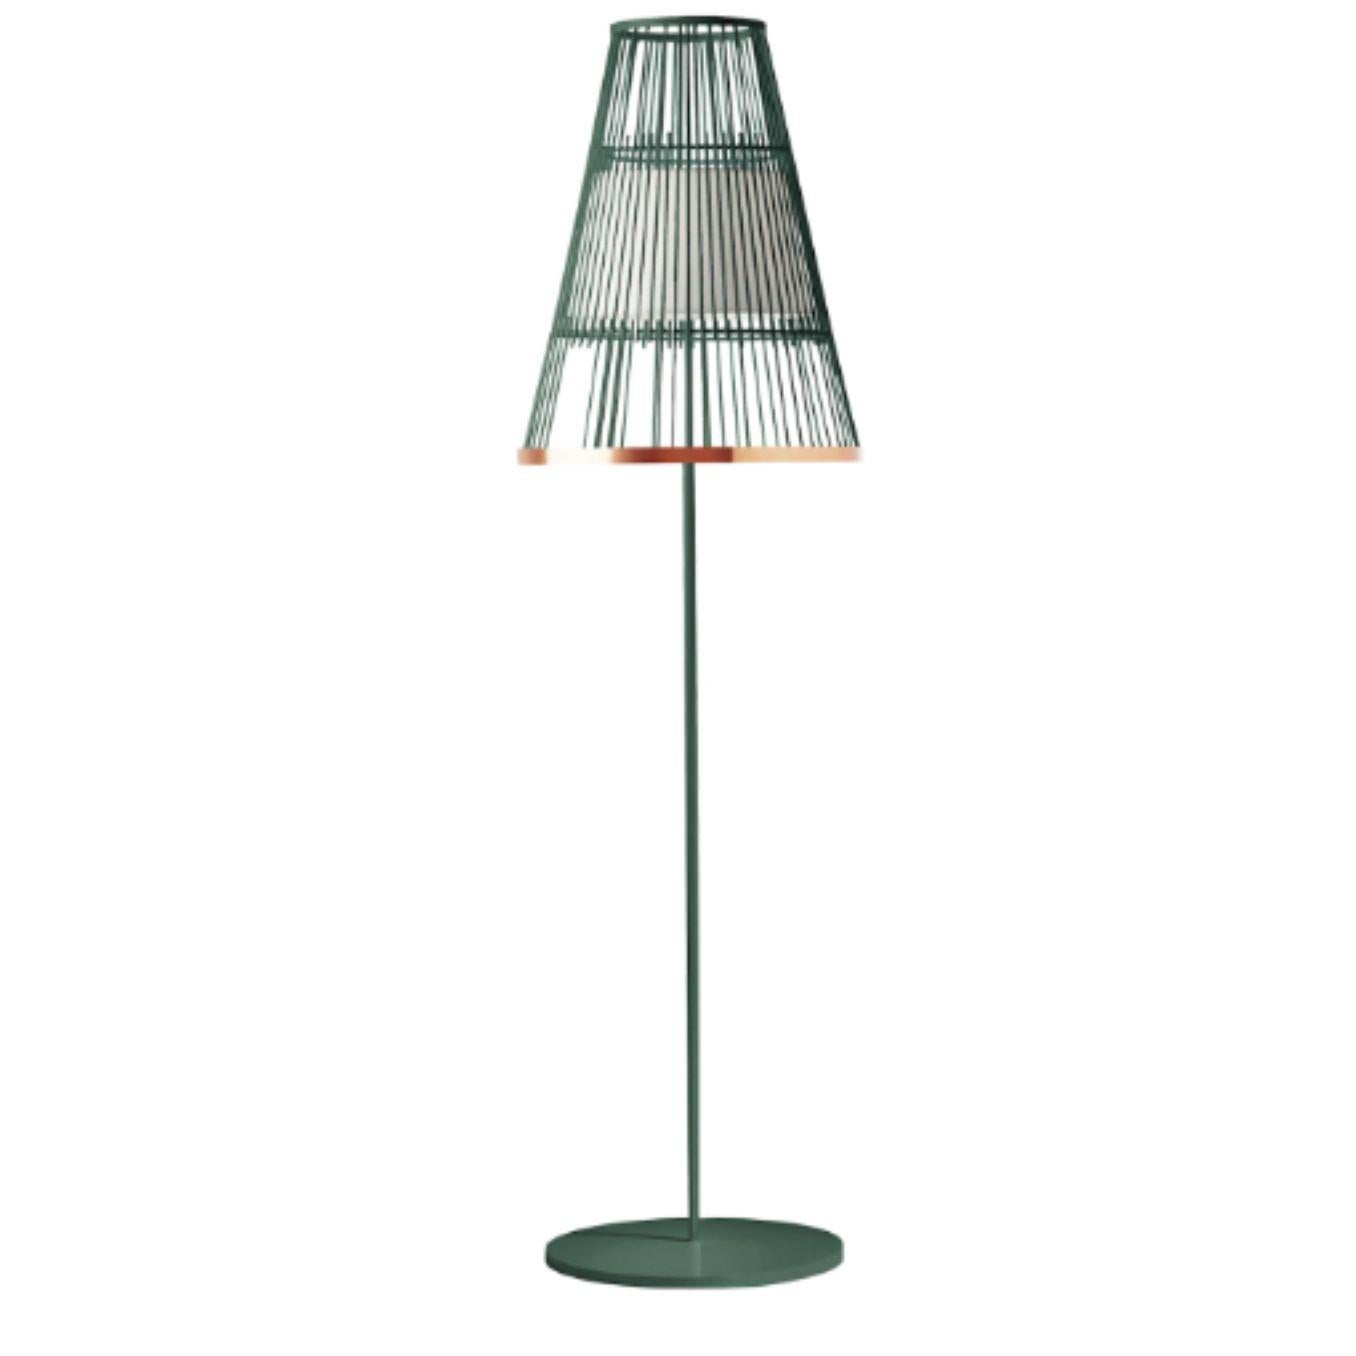 Moss Up floor lamp with copper ring by Dooq
Dimensions: W 47 x D 47 x H 170 cm
Materials: lacquered metal, polished or brushed metal, copper.
Abat-jour: cotton
Also available in different colors and materials. 

Information:
230V/50Hz
E27/1x20W